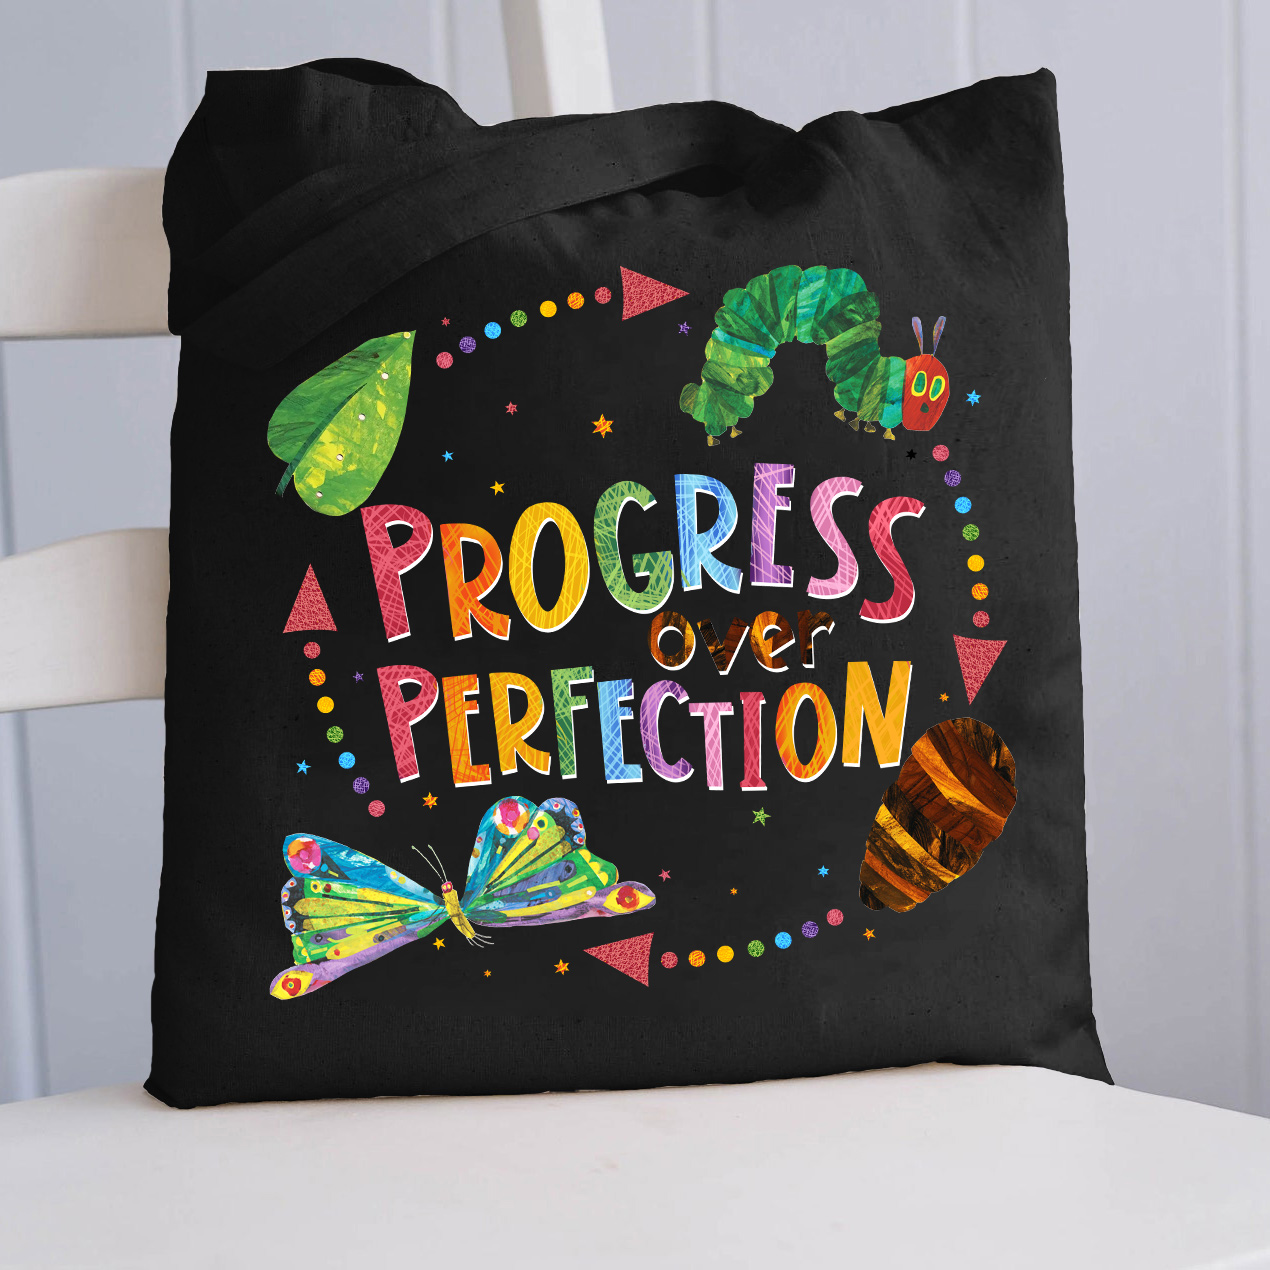 Progress Over Perfection Tote Bag